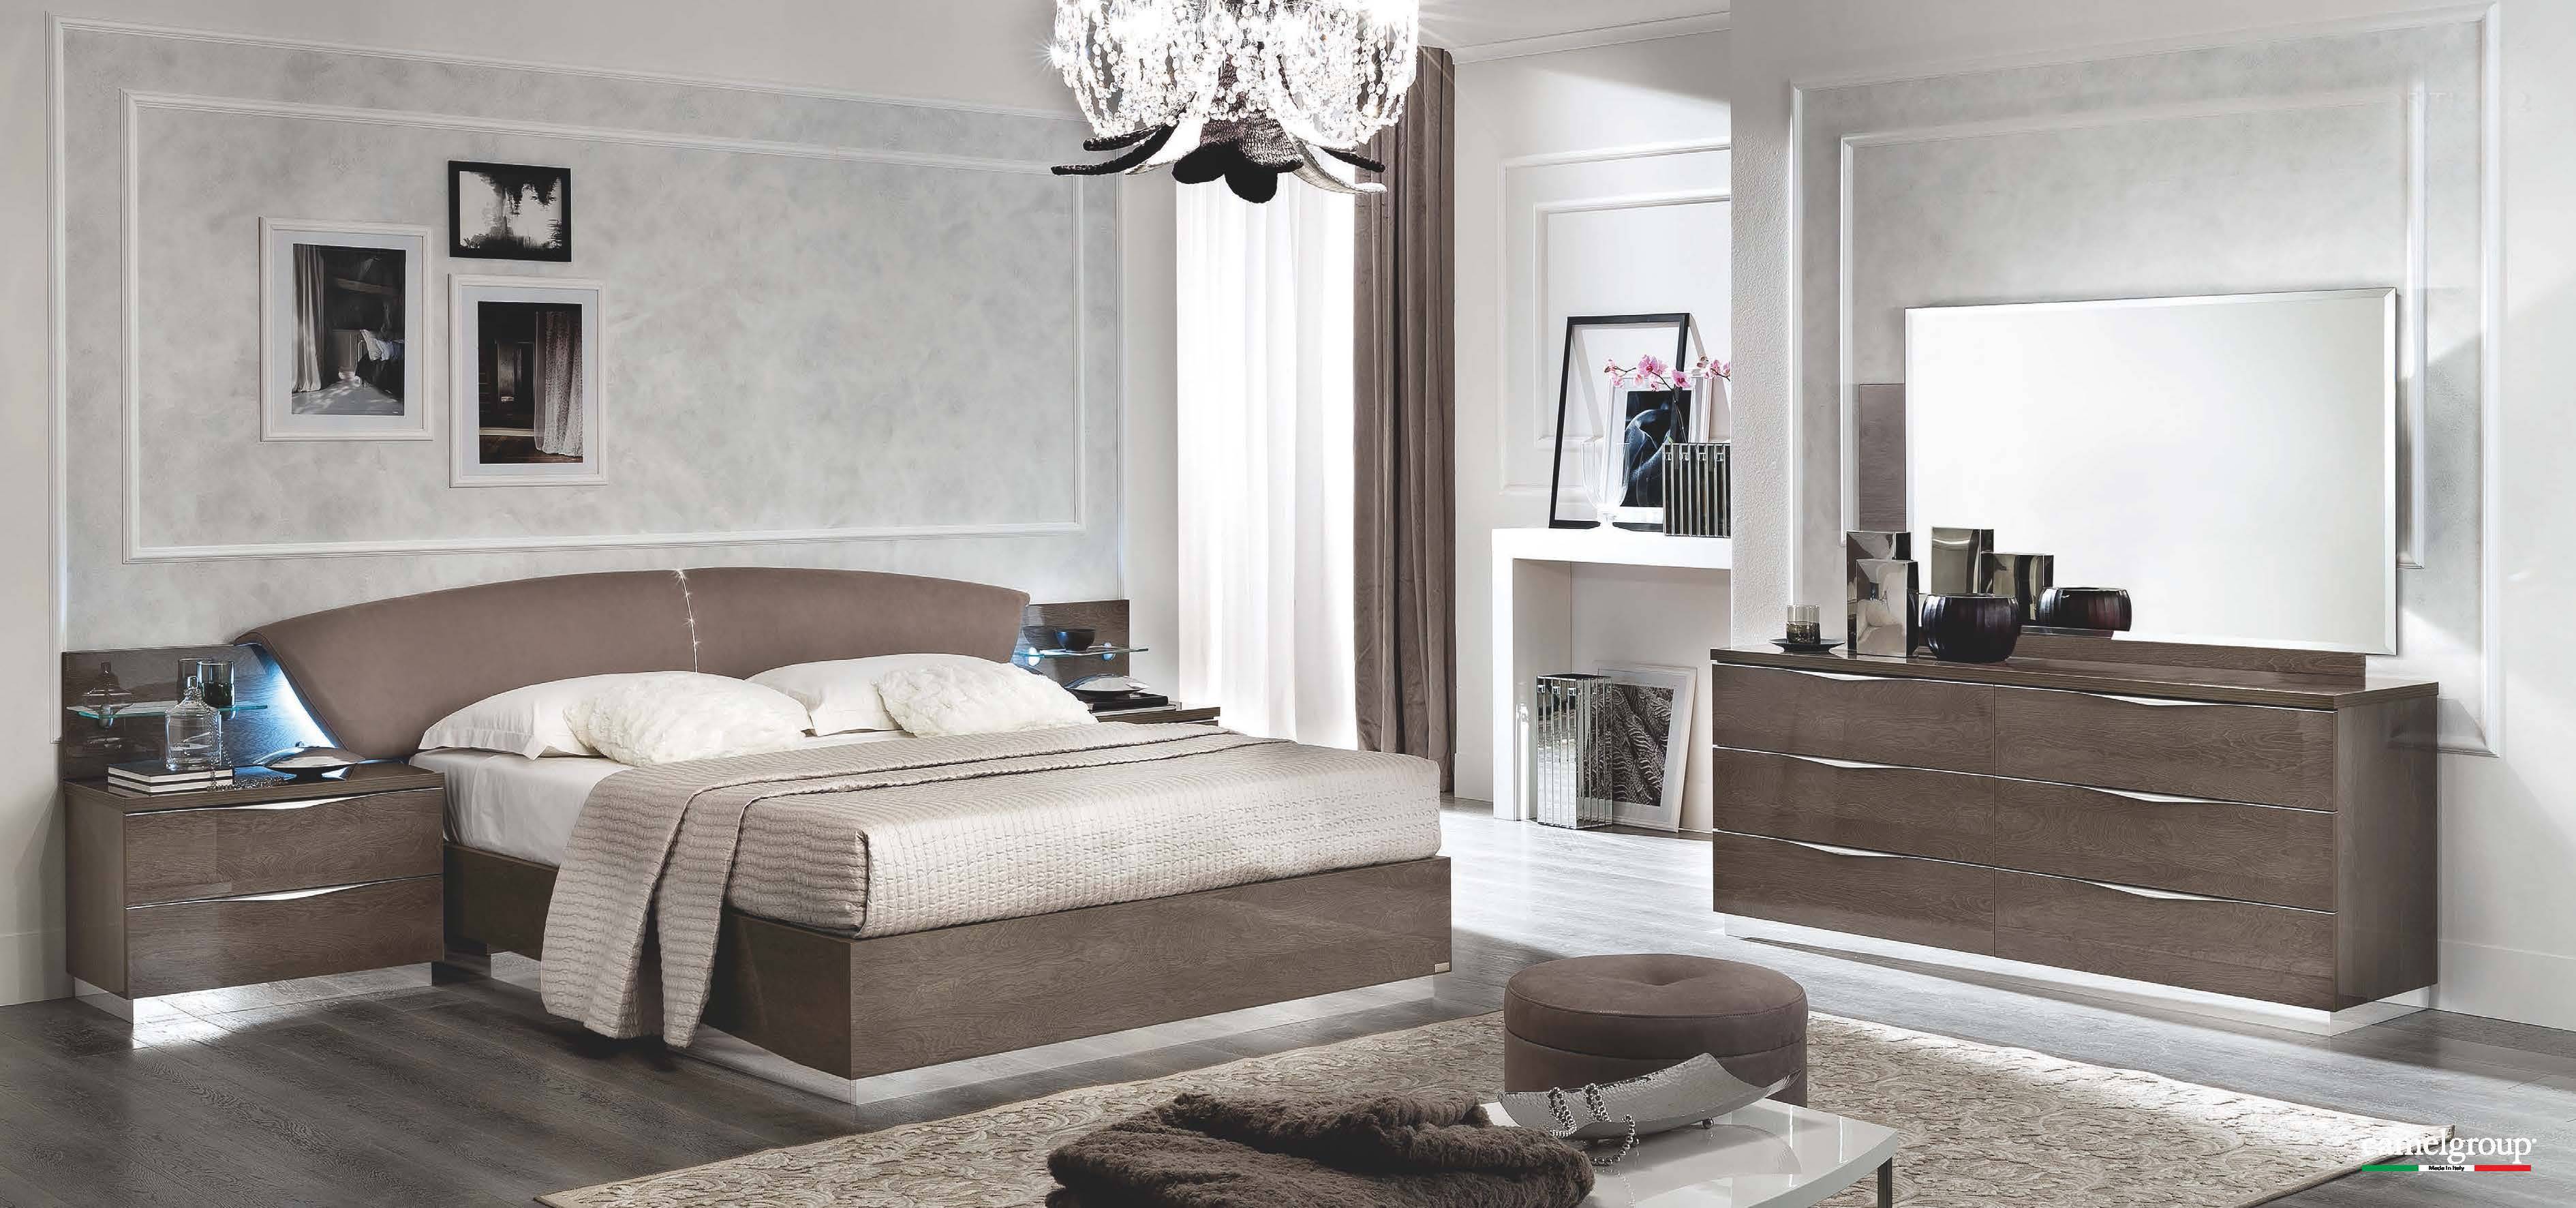 Made In Italy Luxury Quality Bedroom Set Camelgroup Platinum 